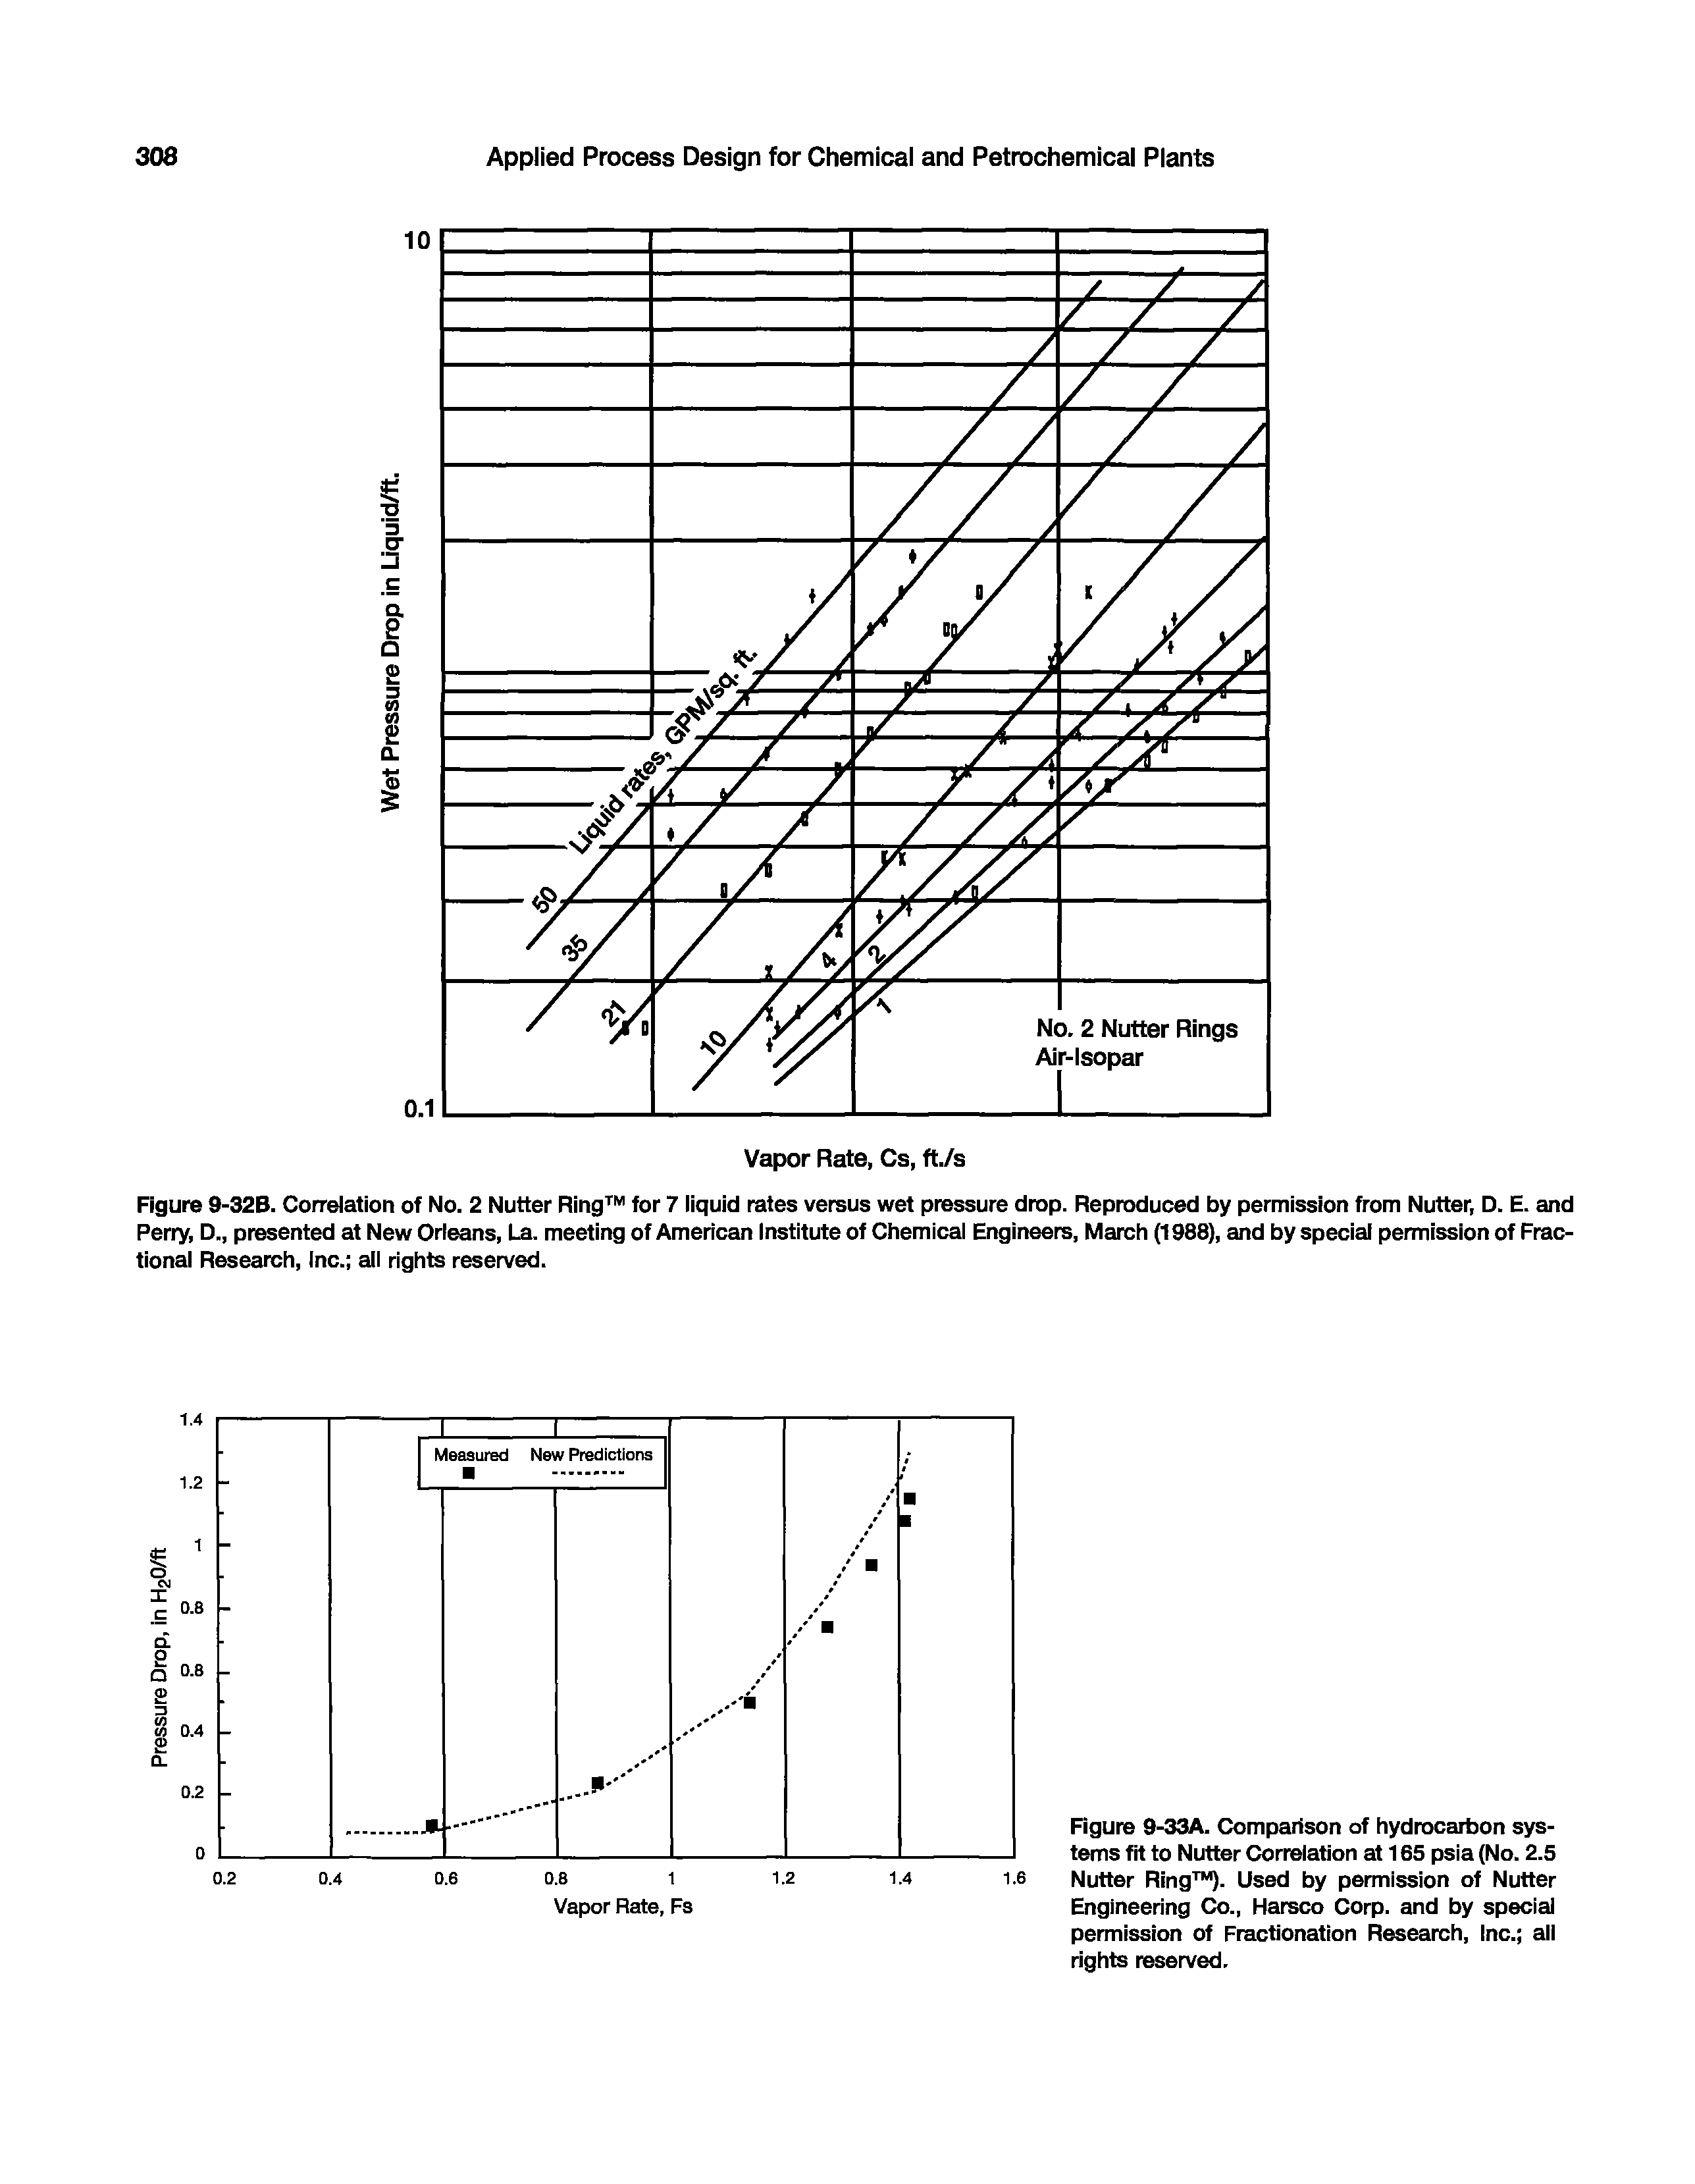 Figure 9-32B. Correlation of No. 2 Nutter Ring for 7 liquid rates versus wet pressure drop. Reproduced by permission from Nutter, D. E. and Perry, D., presented at New Orleans, La. meeting of American Institute of Chemical Engineers, March (1988), and by special permission of Fractional Research, Inc. all rights reserved.